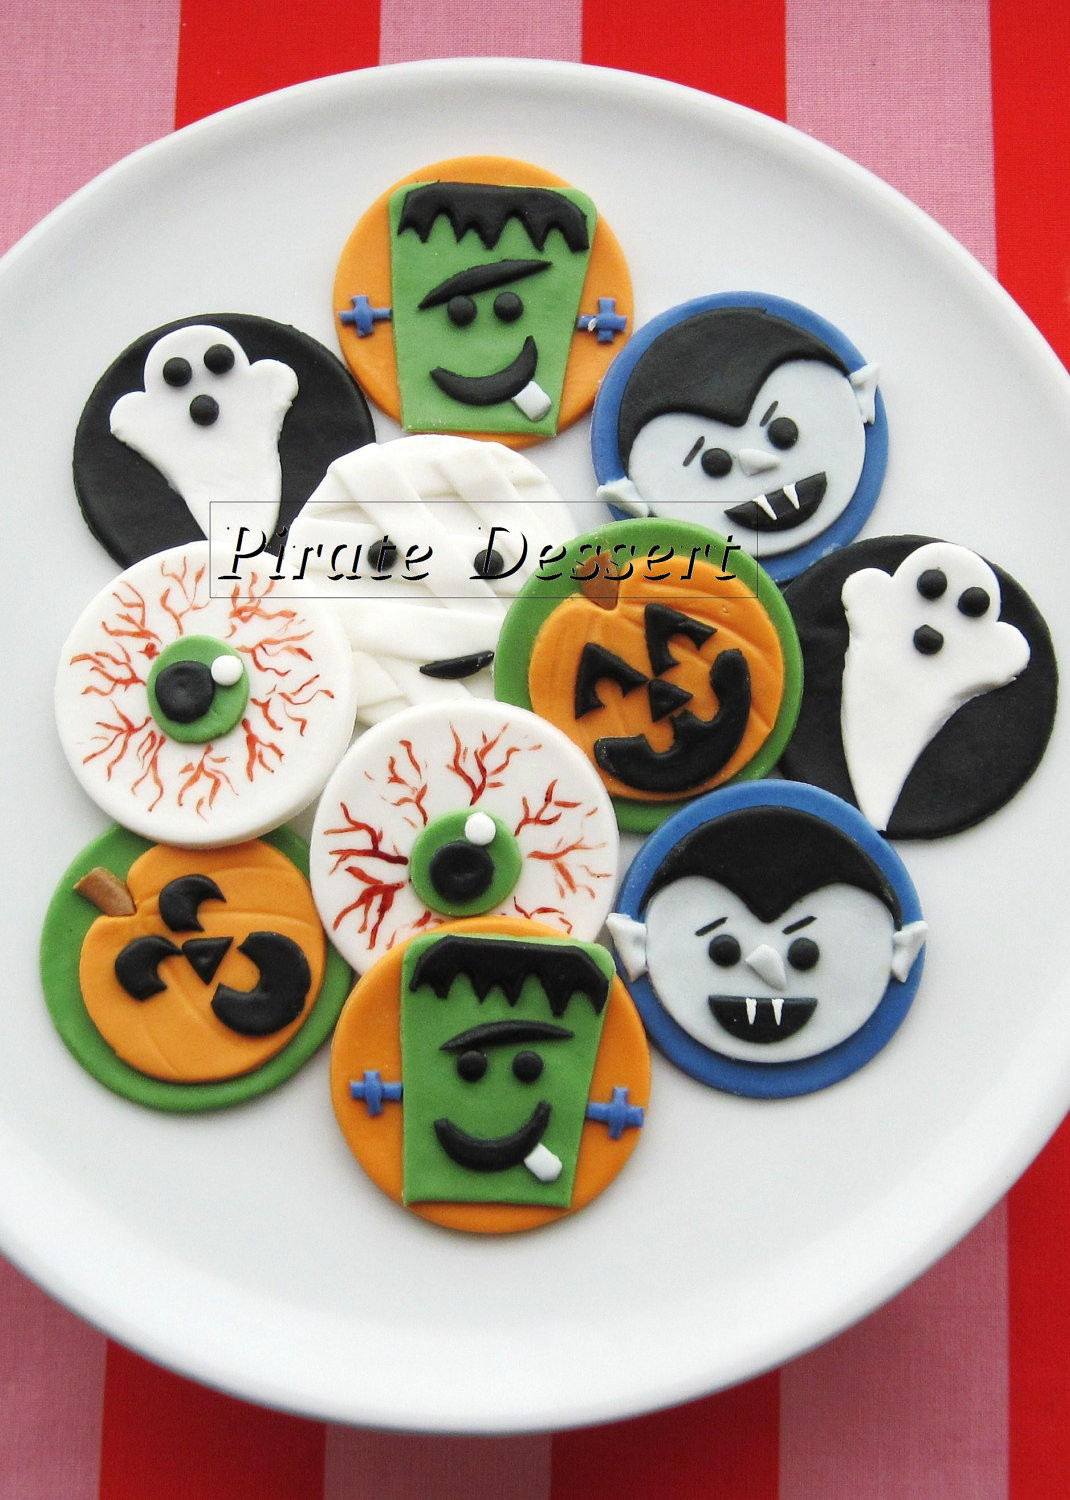 Halloween Cupcakes Toppers
 Edible Halloween cupcake toppers MONSTERS by PirateDessert